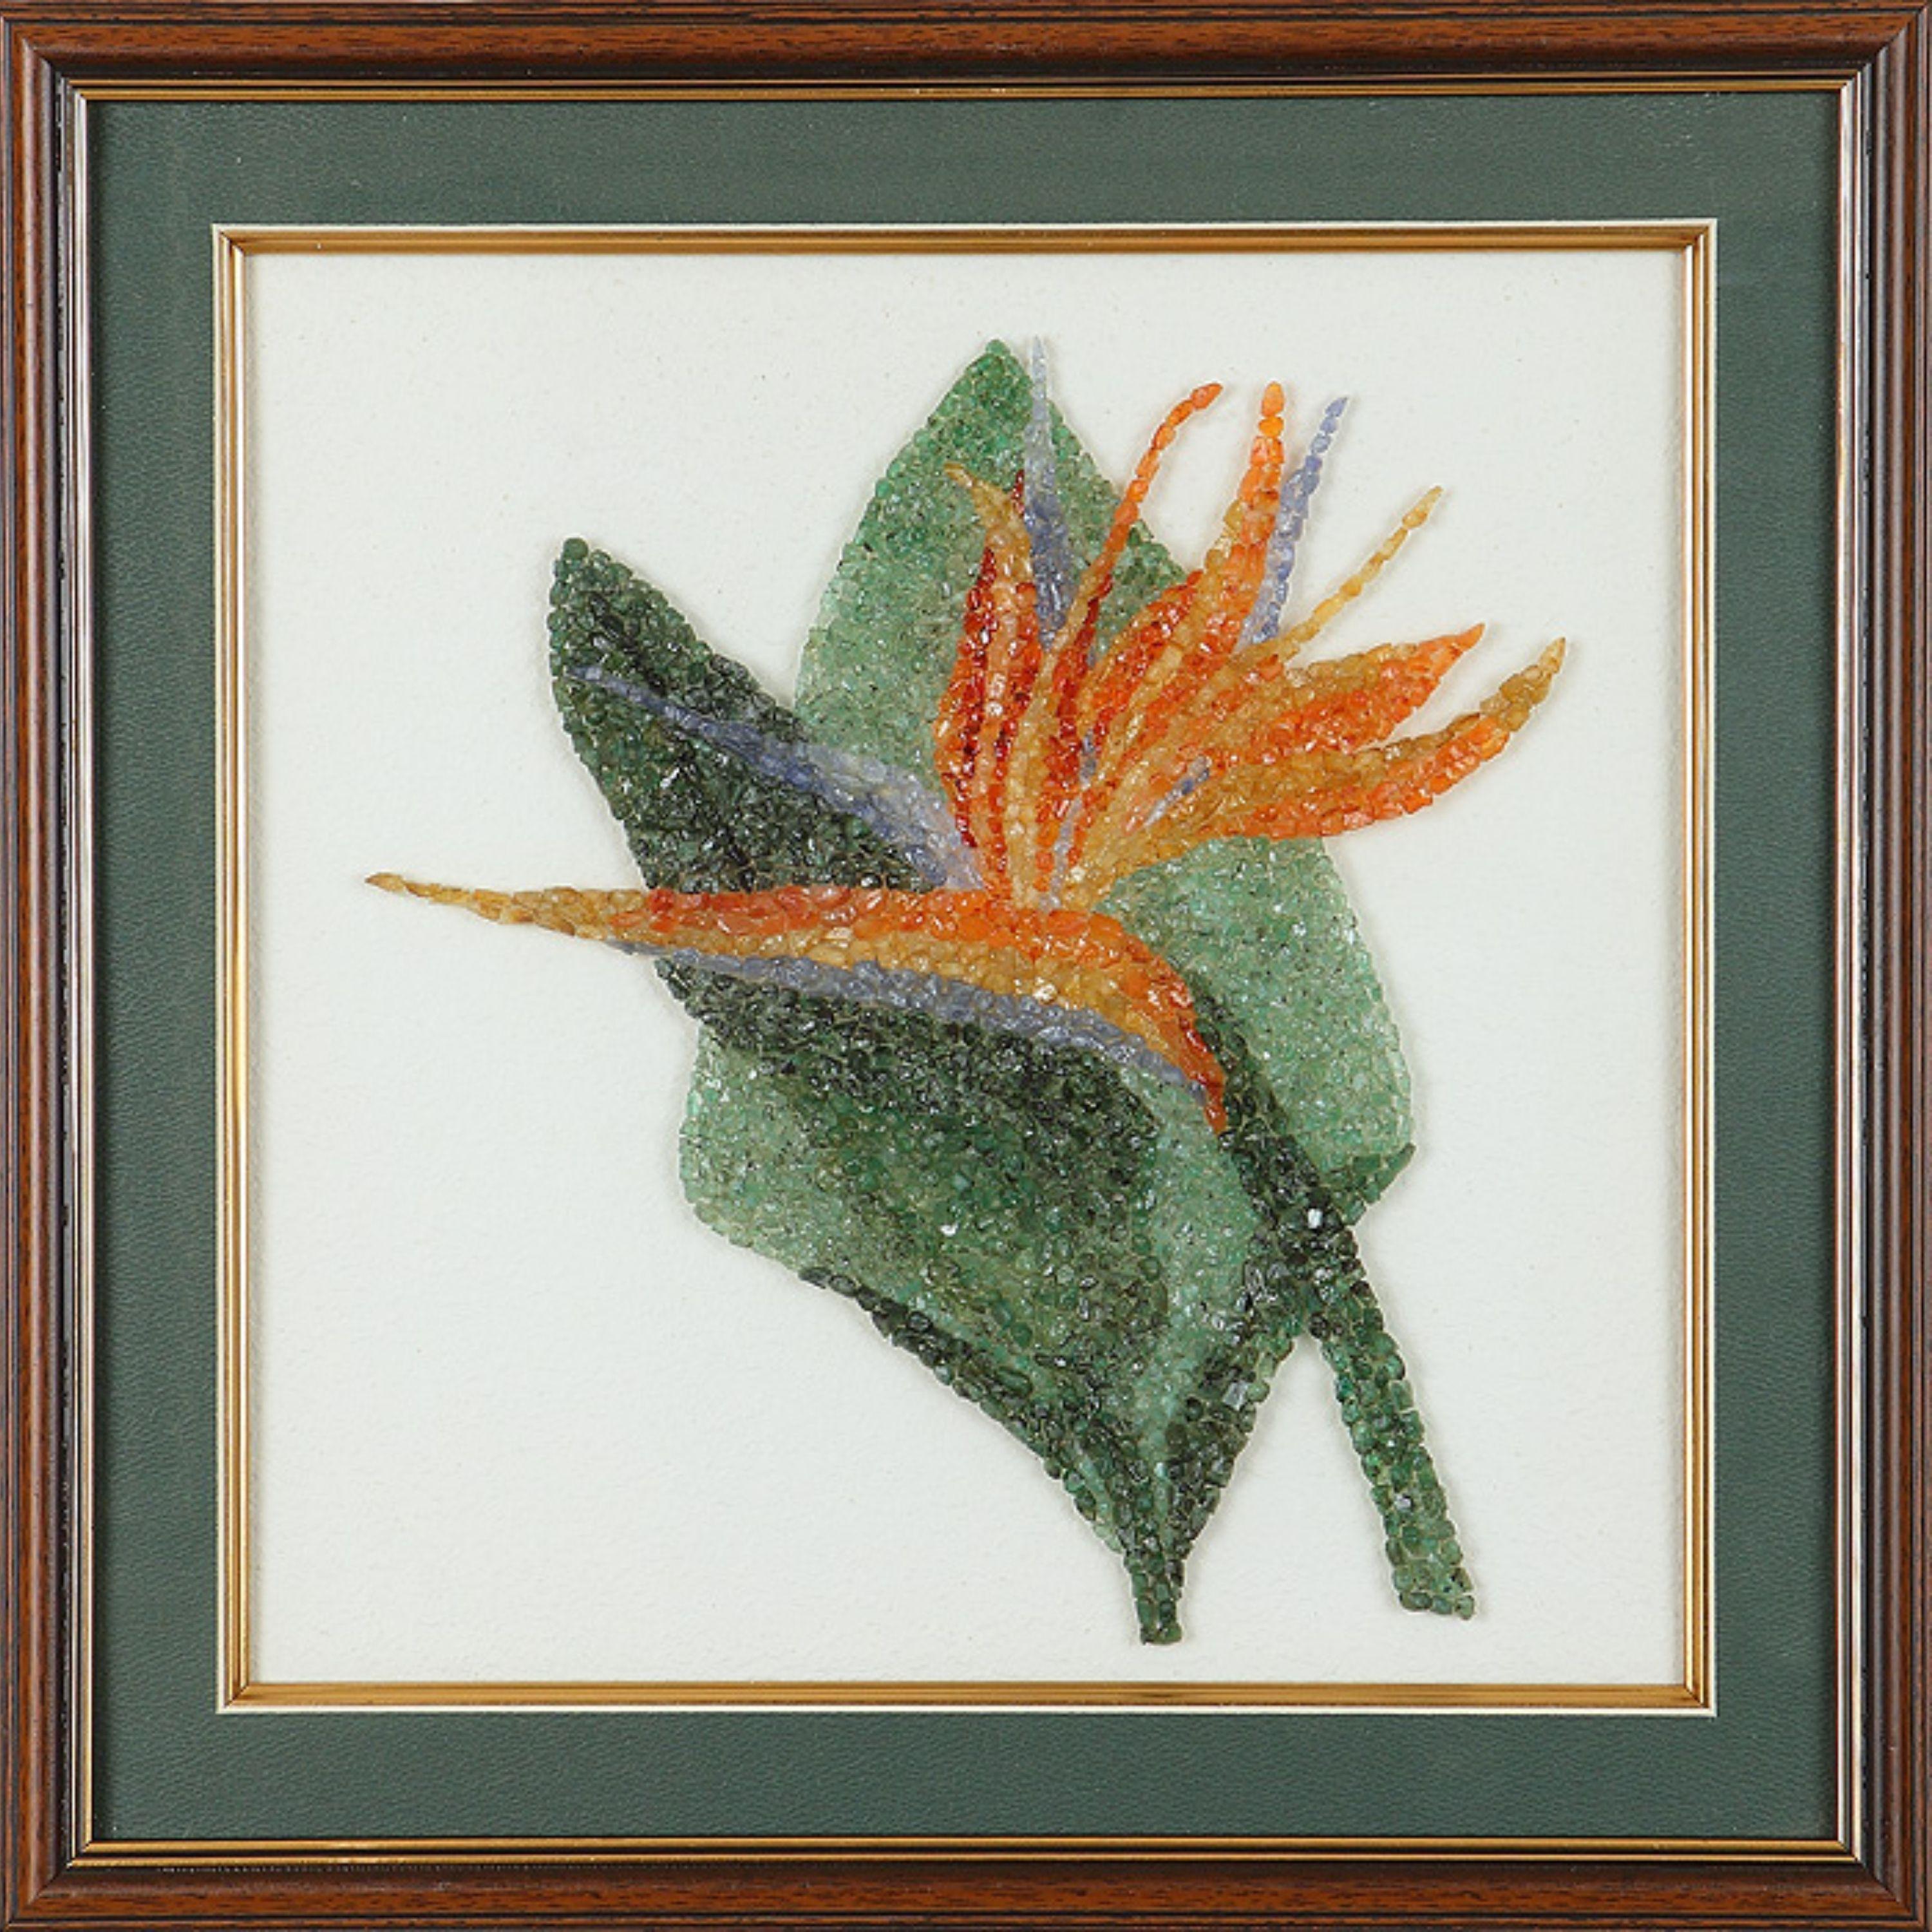 A very gorgeous Floral artwork made using Emerald, Carnelian & Yellow Sapphire. The gemstones used in this artwork is completely natural, without any treatment. The size of the artwork is 20 inches x 20 inches. The frame is of a simple painted green